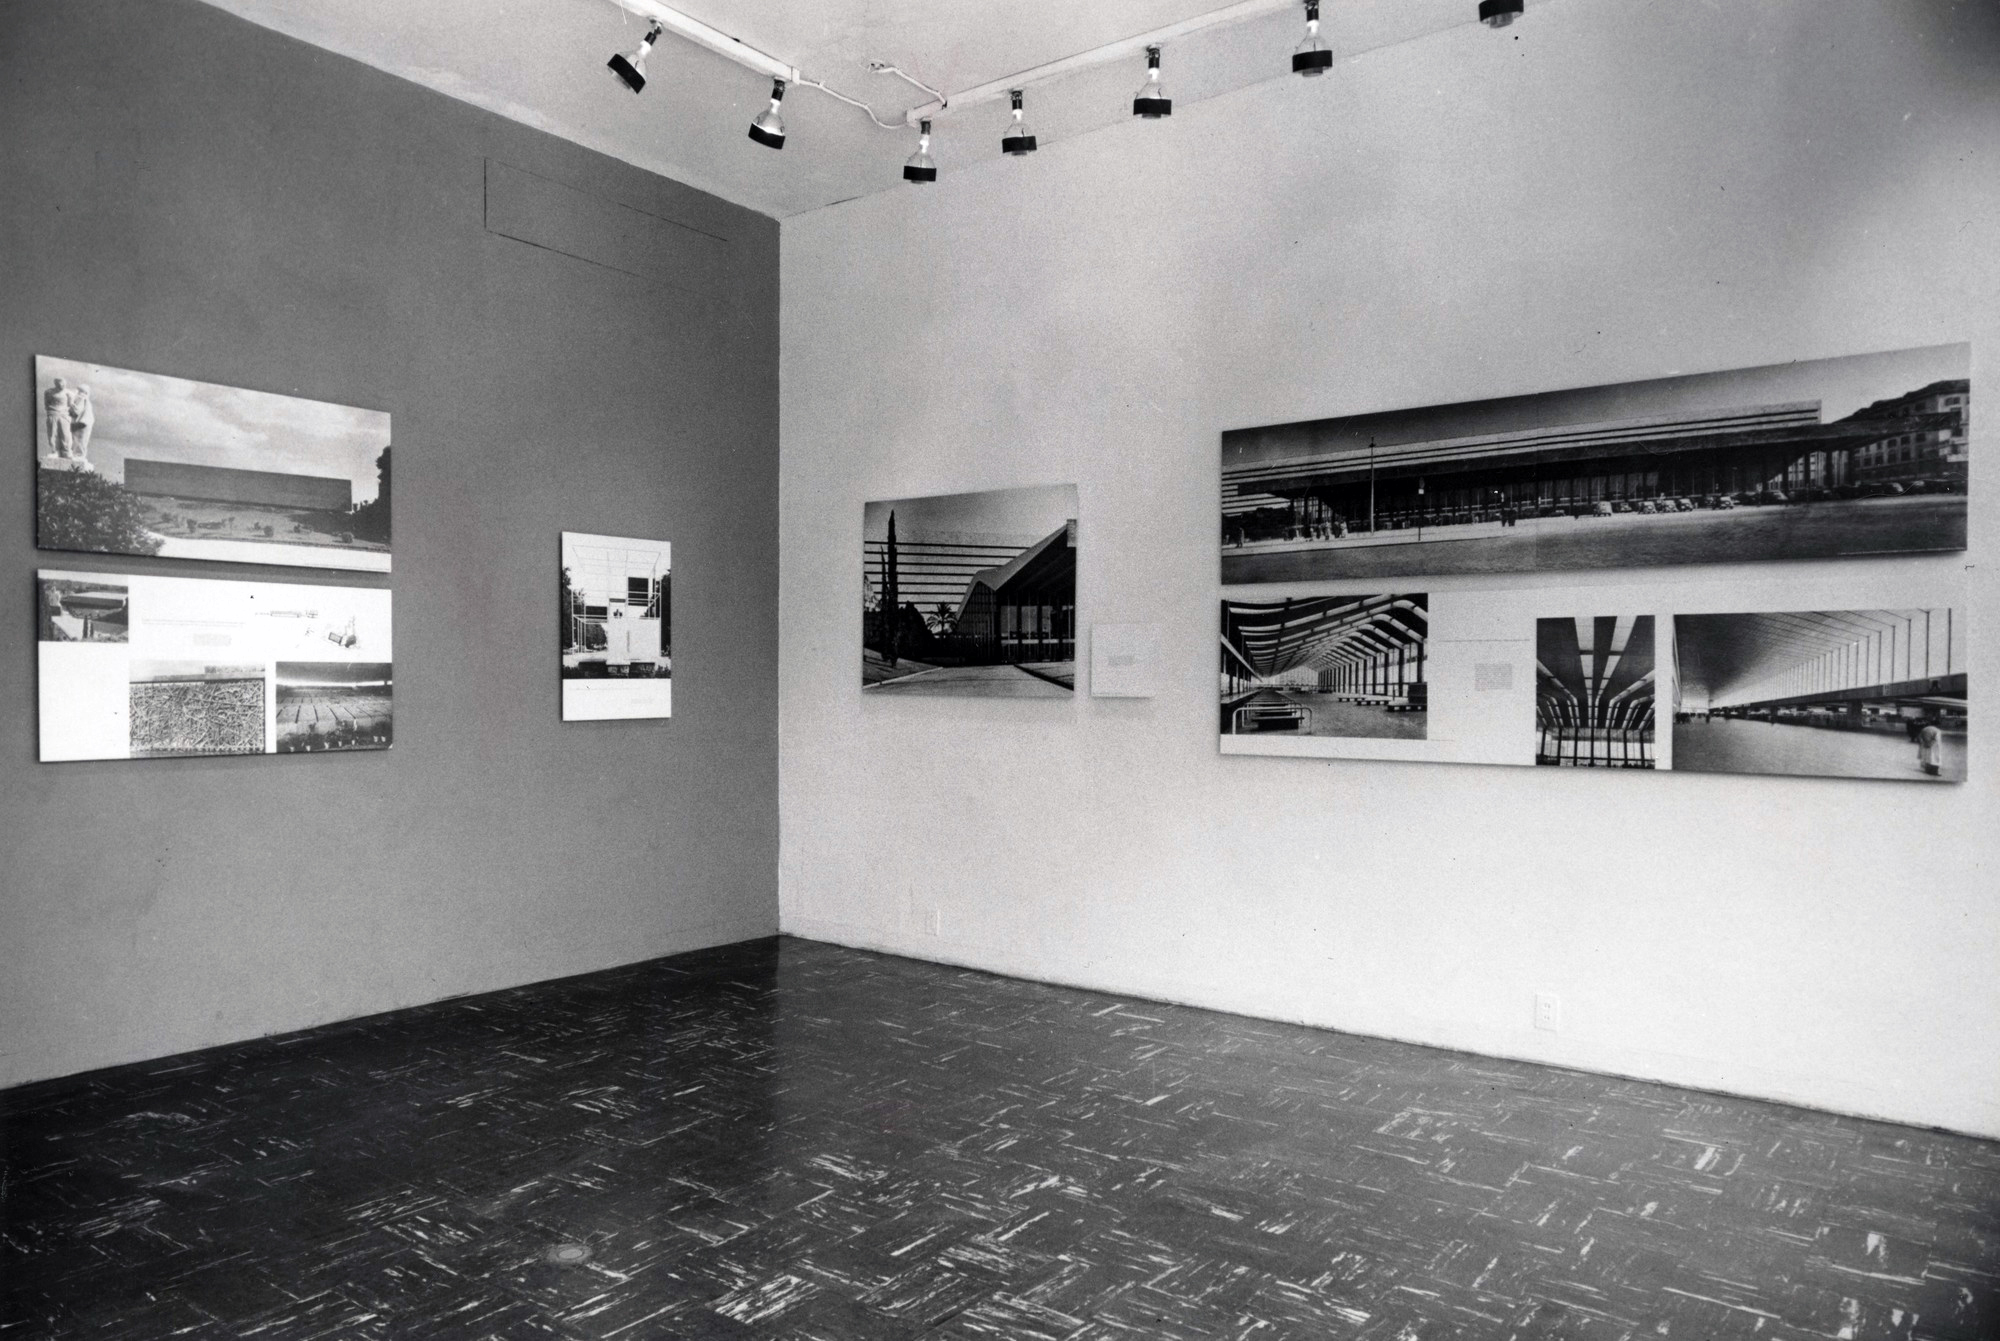 Installation view at the New York opening, Section "The Post-War Work: Architecture"